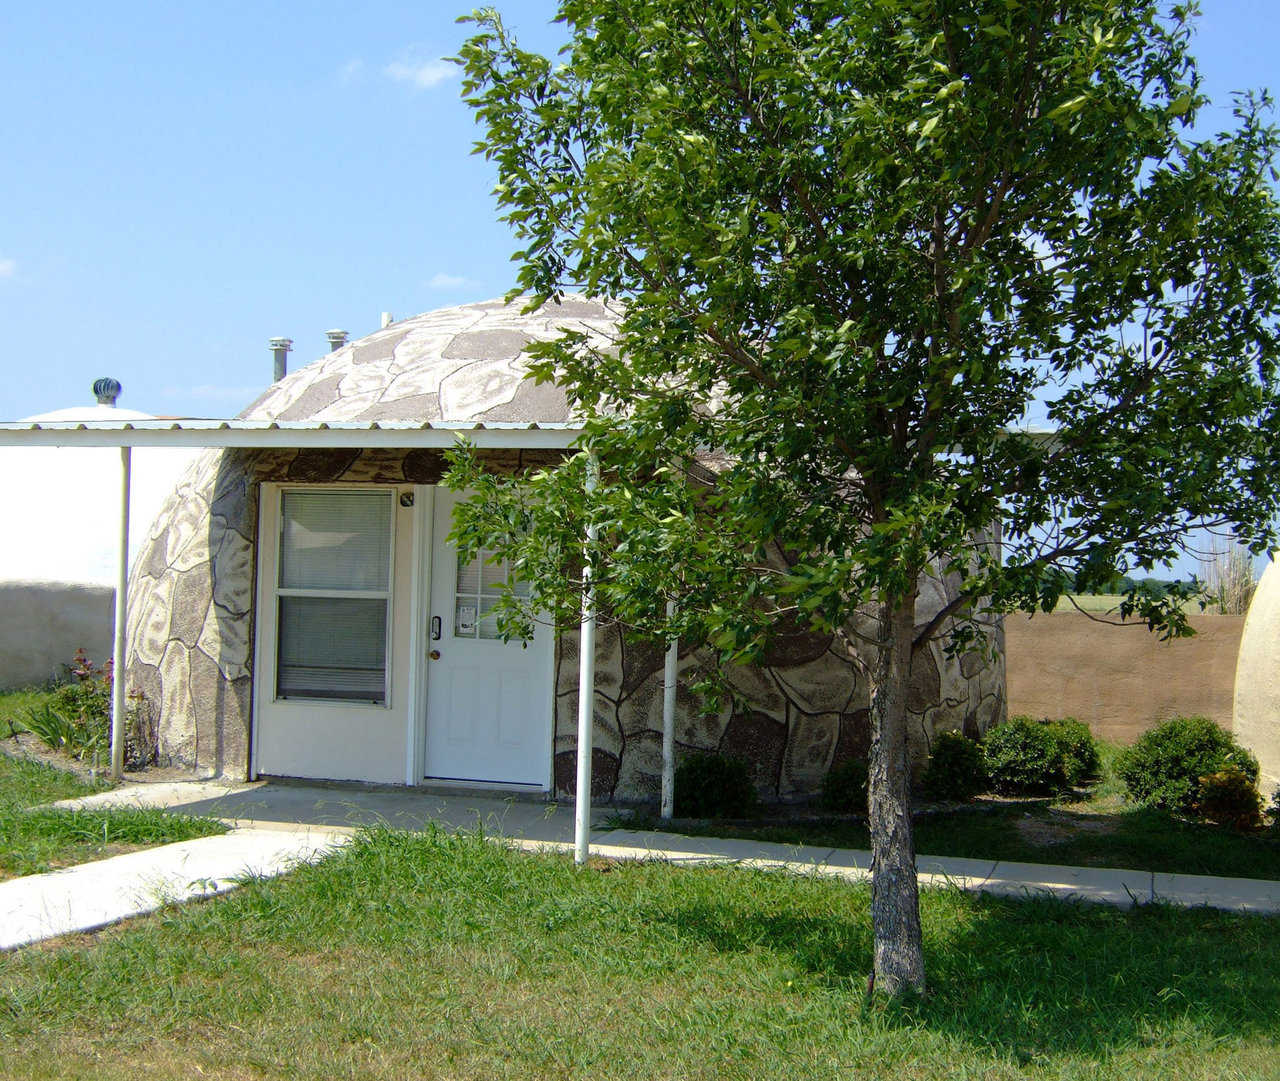 IO-24 — This IO-24 is located on the Monolithic Dome Institute’s property in Italy, Texas.  It is a 450 square foot rental unit.  The concrete coating on the outside of this dome was stained using  a siliconized concrete stain.